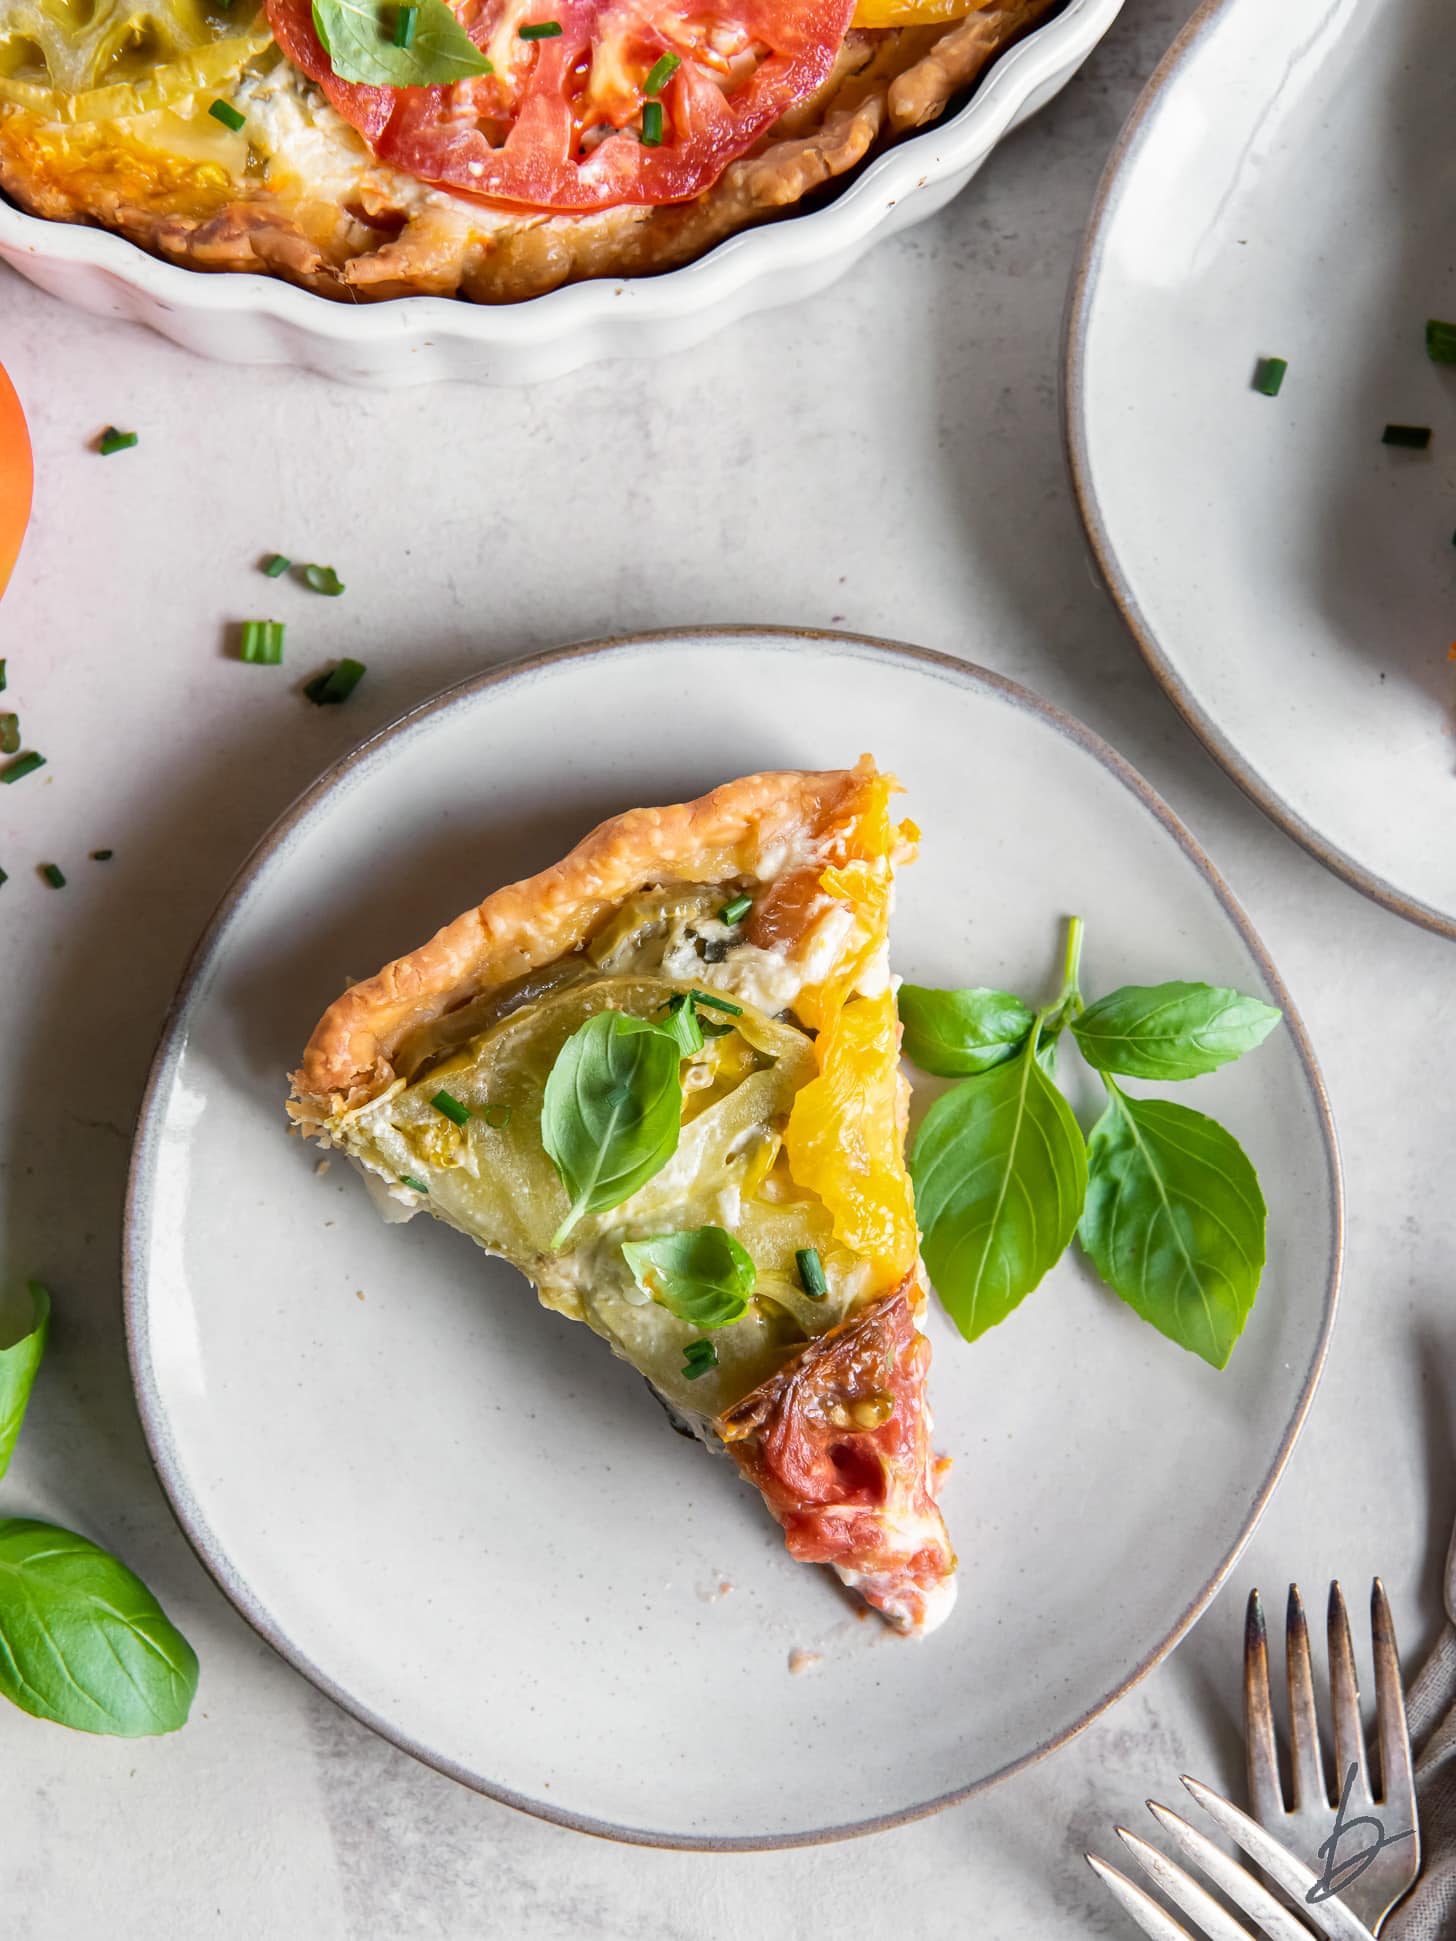 slice of tomato pie and sprig of basil on plate.